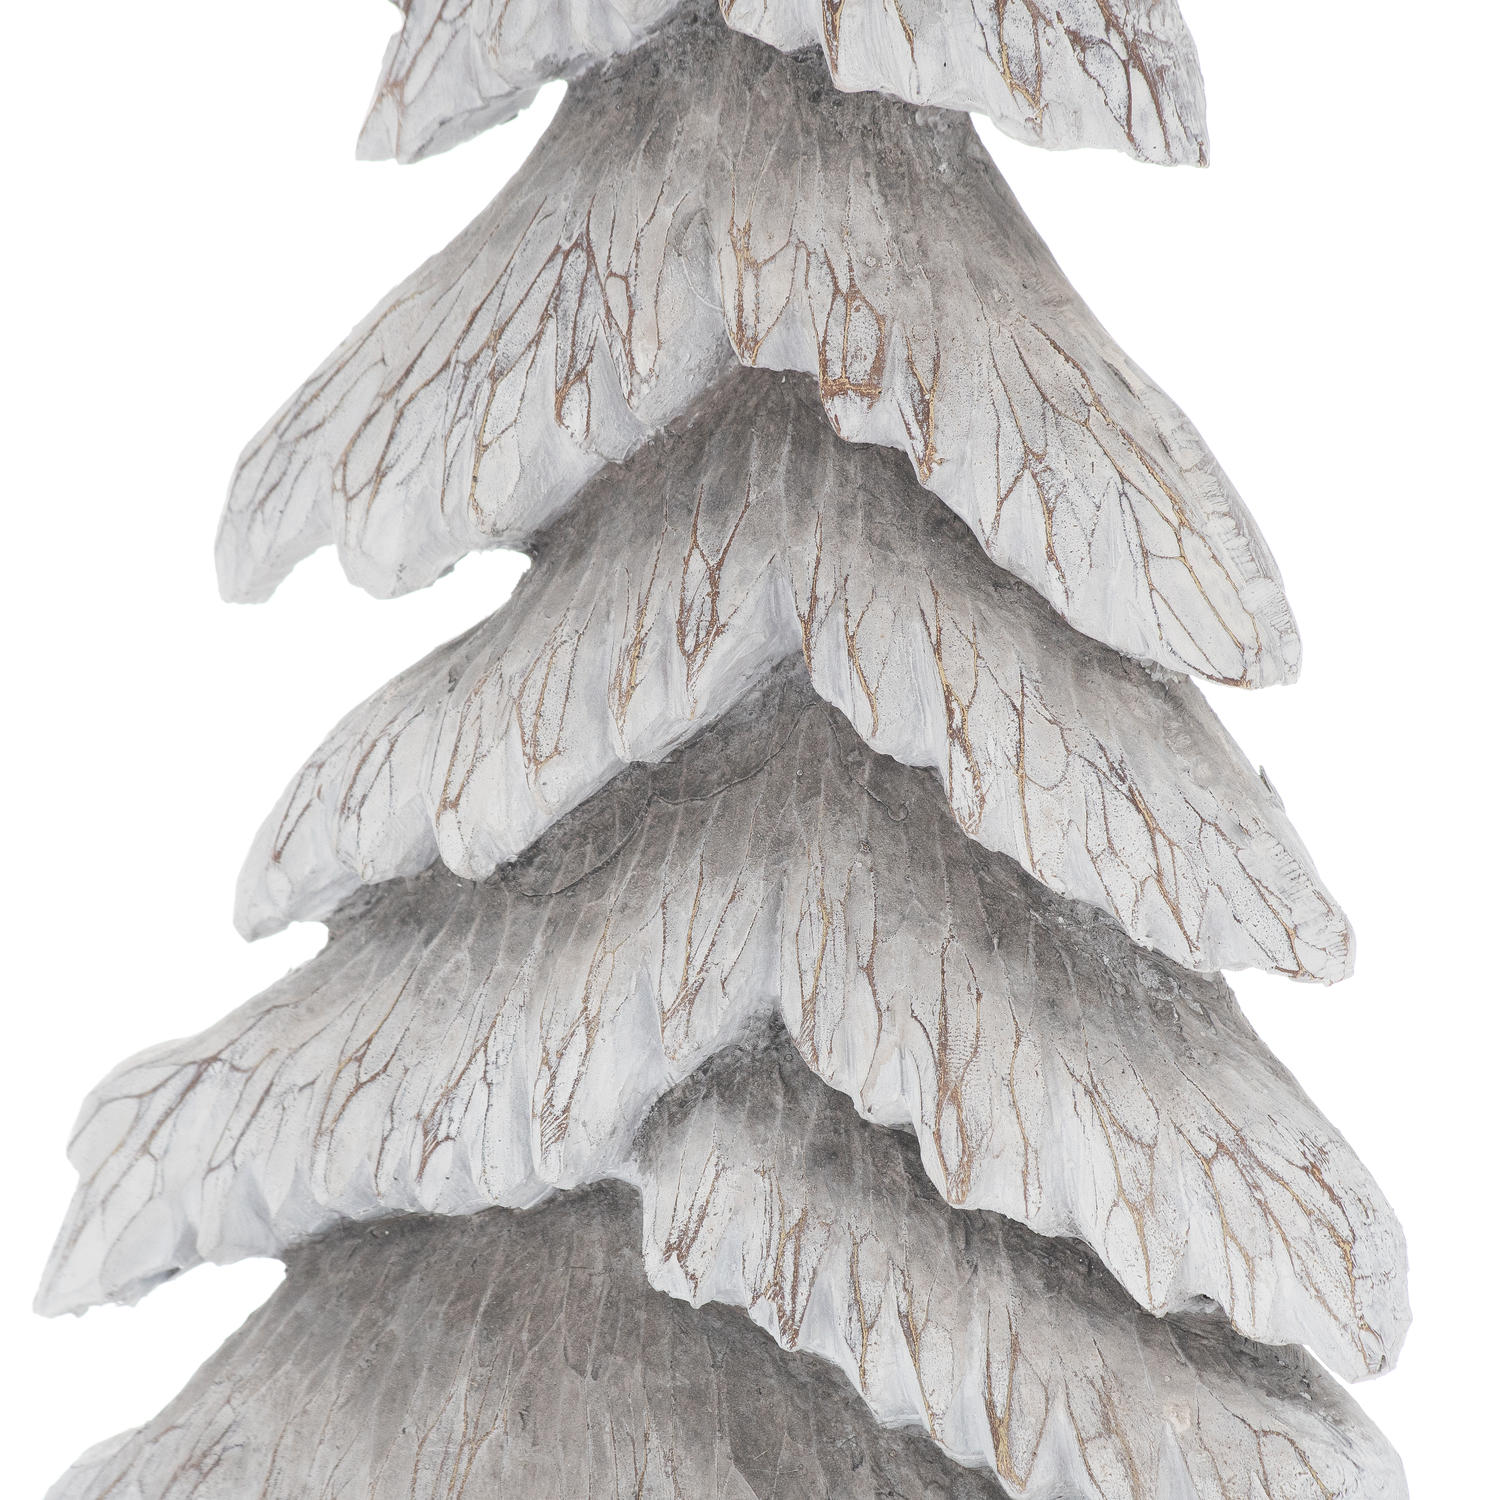 Carved Wood Effect Grey Large Snowy Tree - Image 2